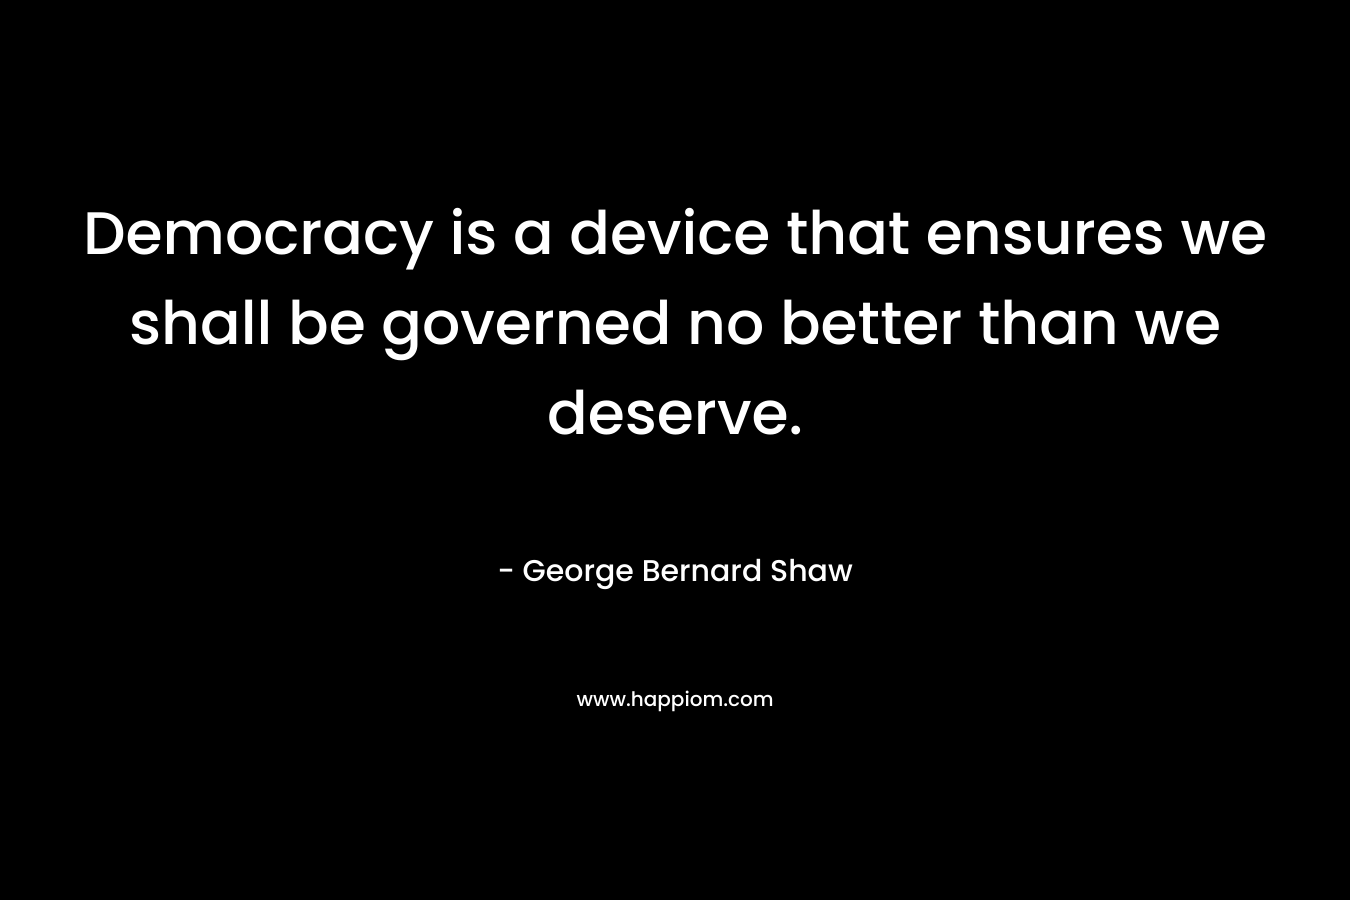 Democracy is a device that ensures we shall be governed no better than we deserve. – George Bernard Shaw